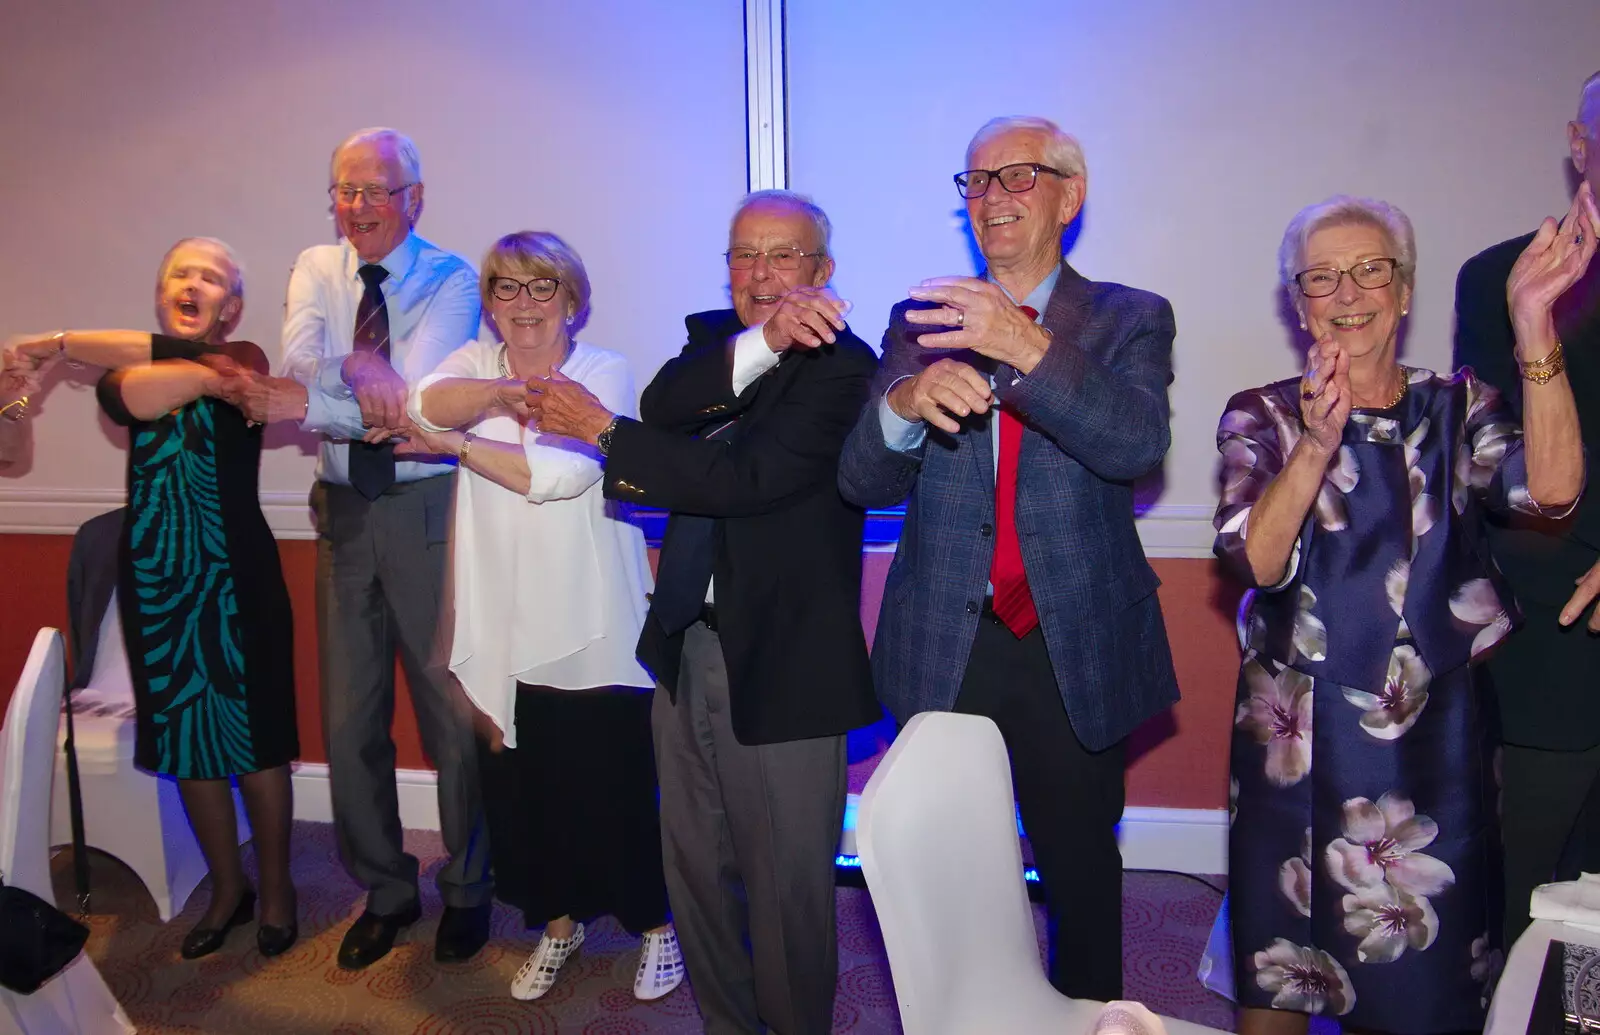 Linked arms break up into clapping, from Kenilworth Castle and the 69th Entry Reunion Dinner, Stratford, Warwickshire - 14th September 2019